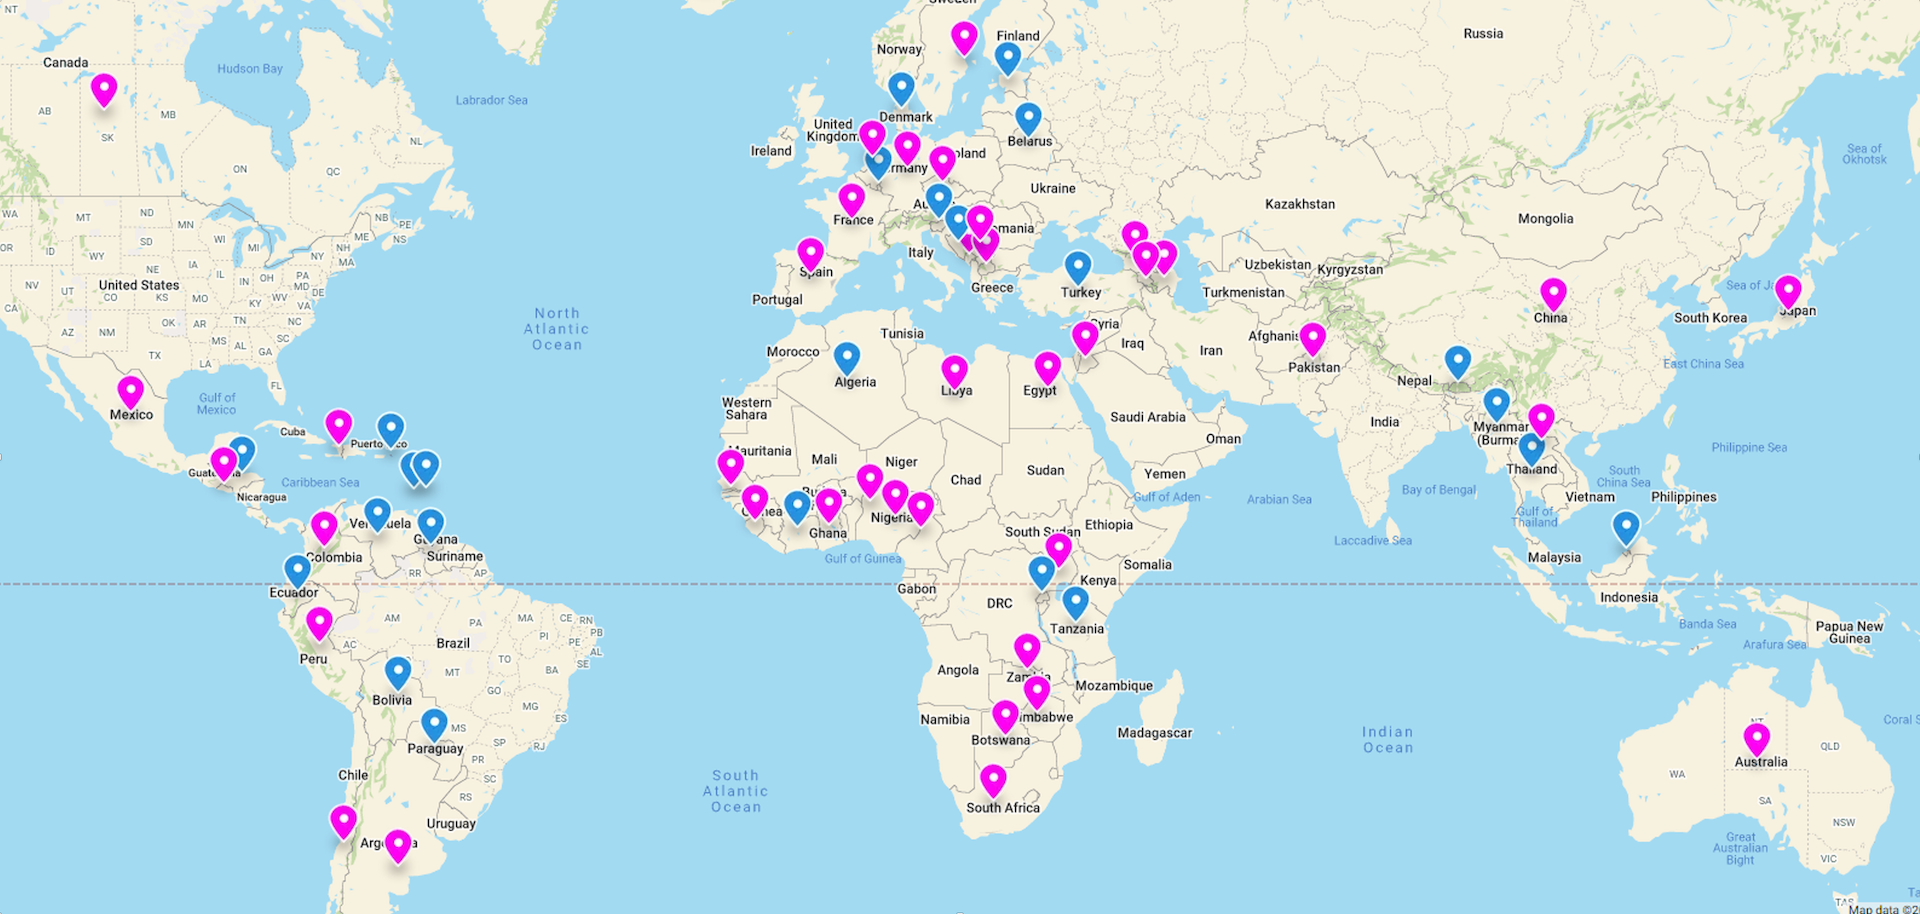 This map shows where UMC training participants came from in 2021. The blue markers indicate places from which there had been no training participants since at least 2010. Map: Padlet